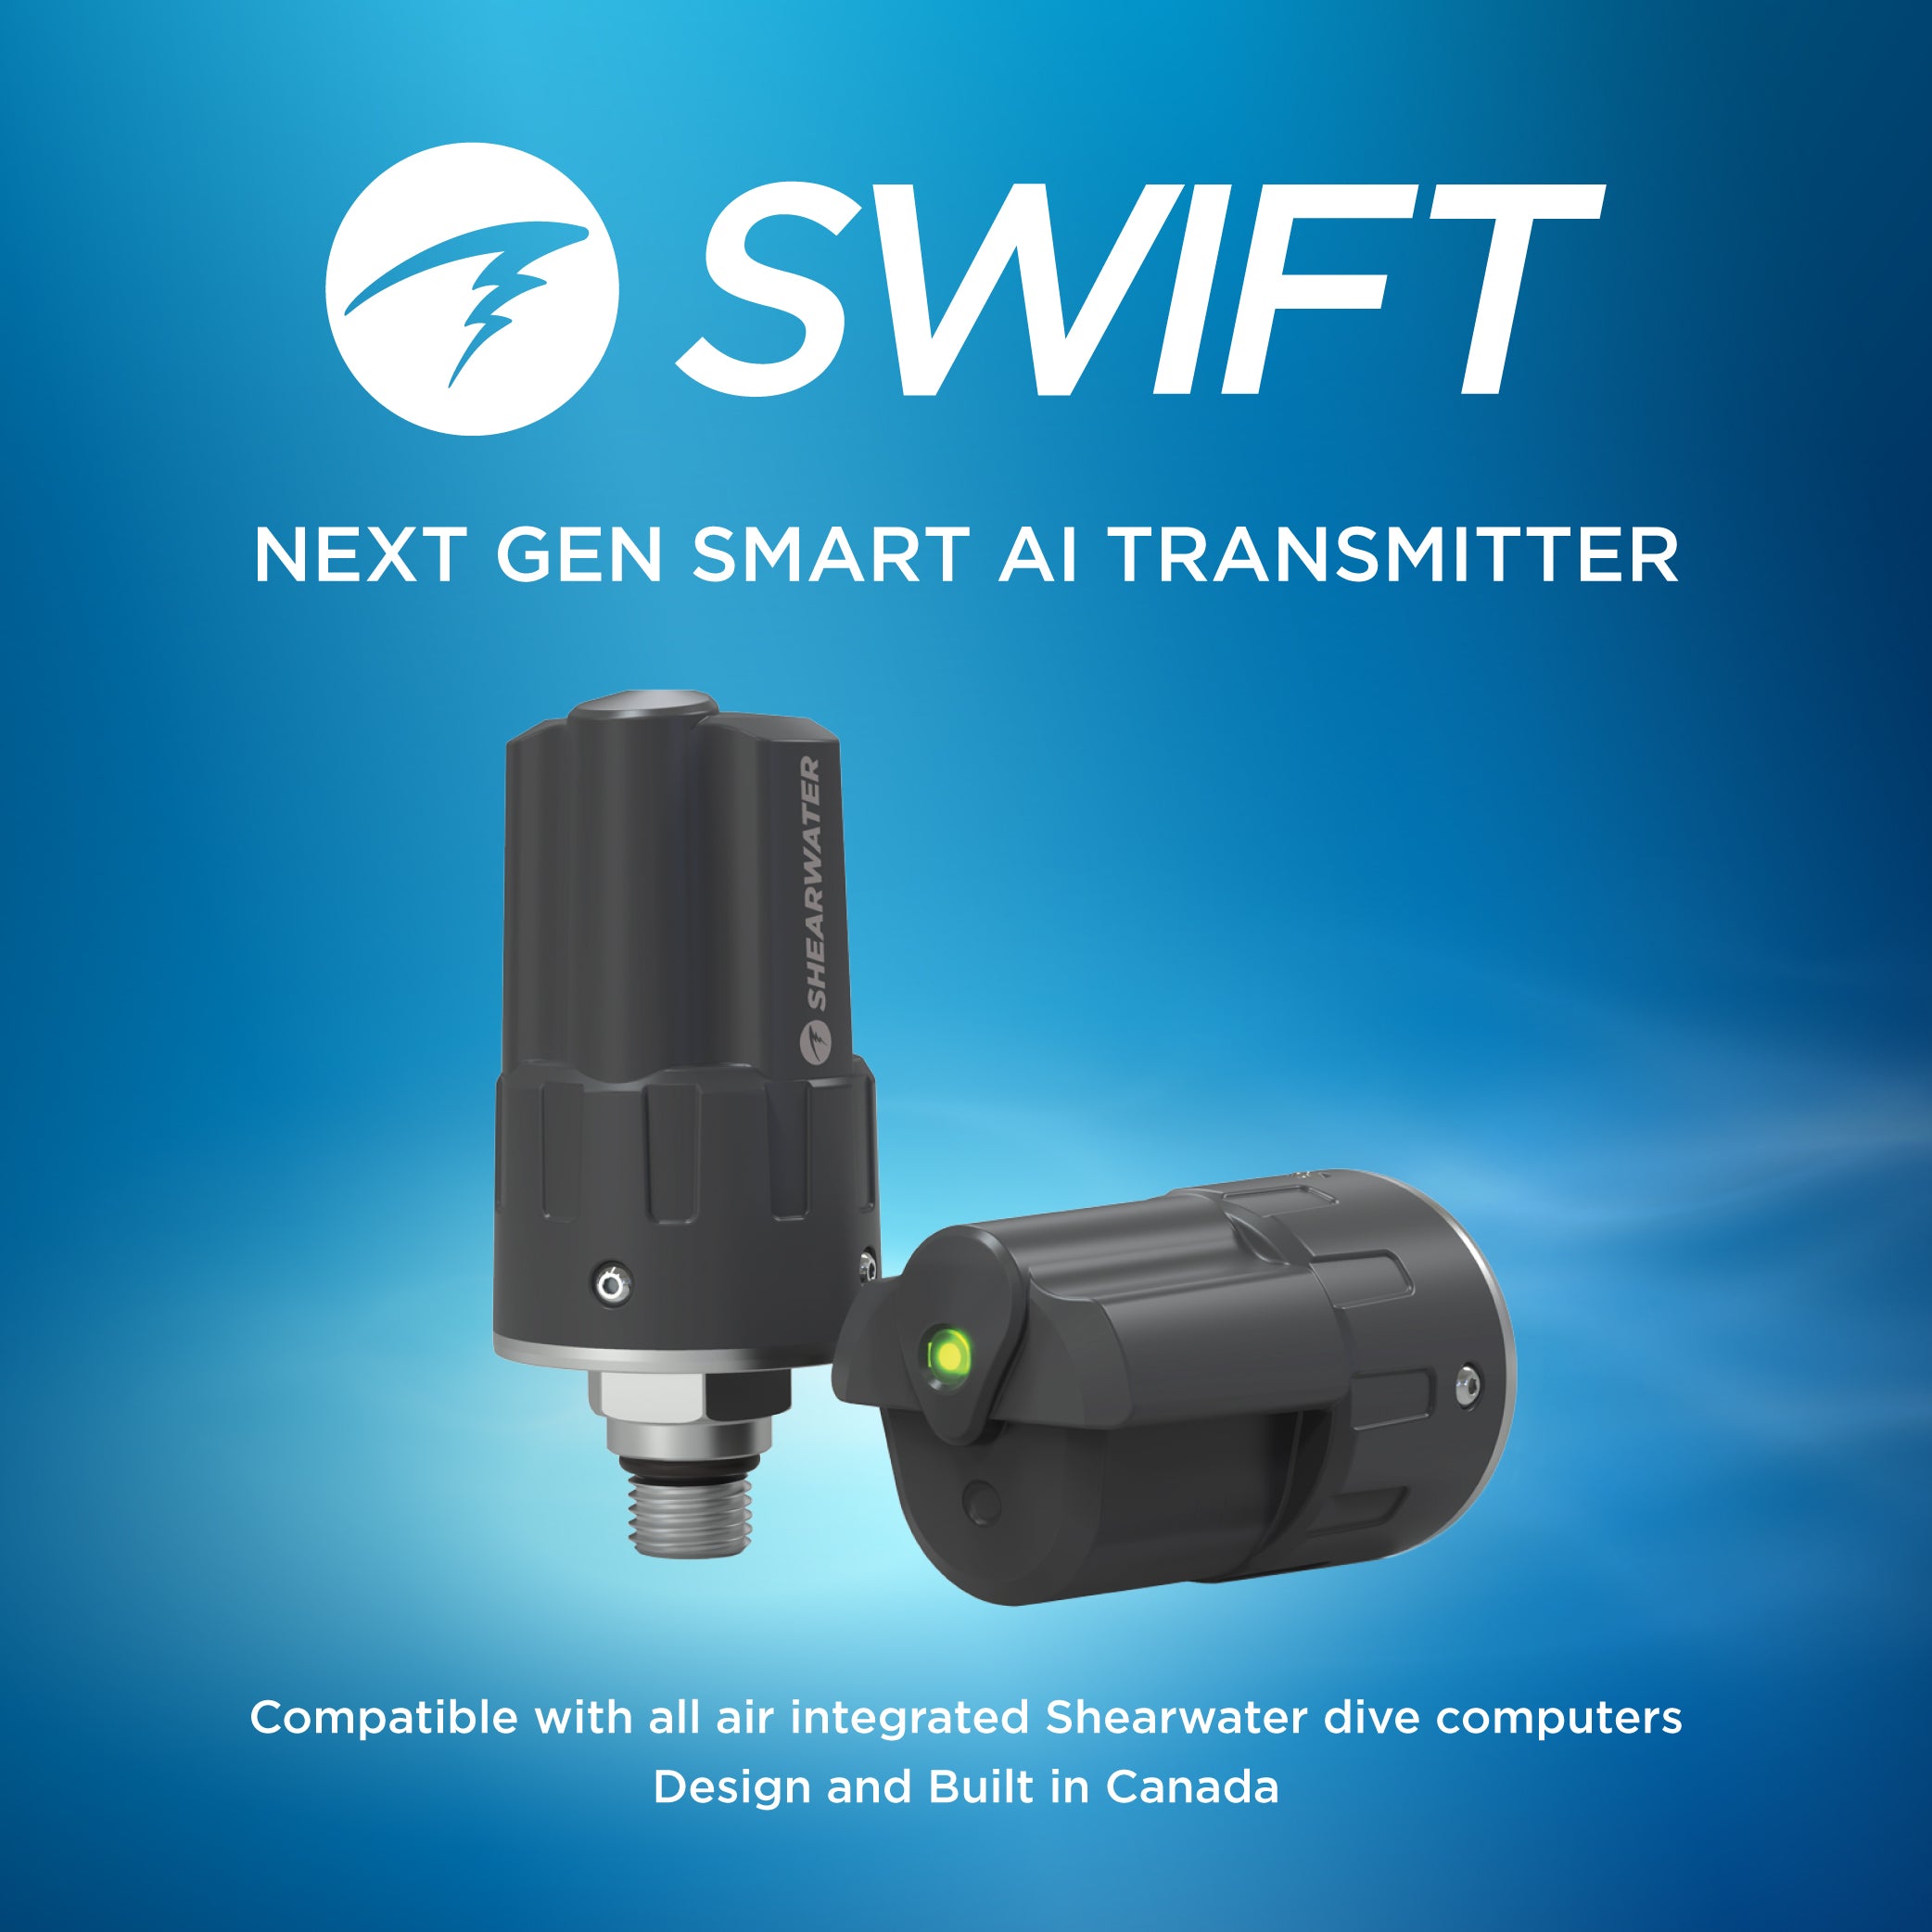 We are excited to announce the release of the SWIFT™ transmitter